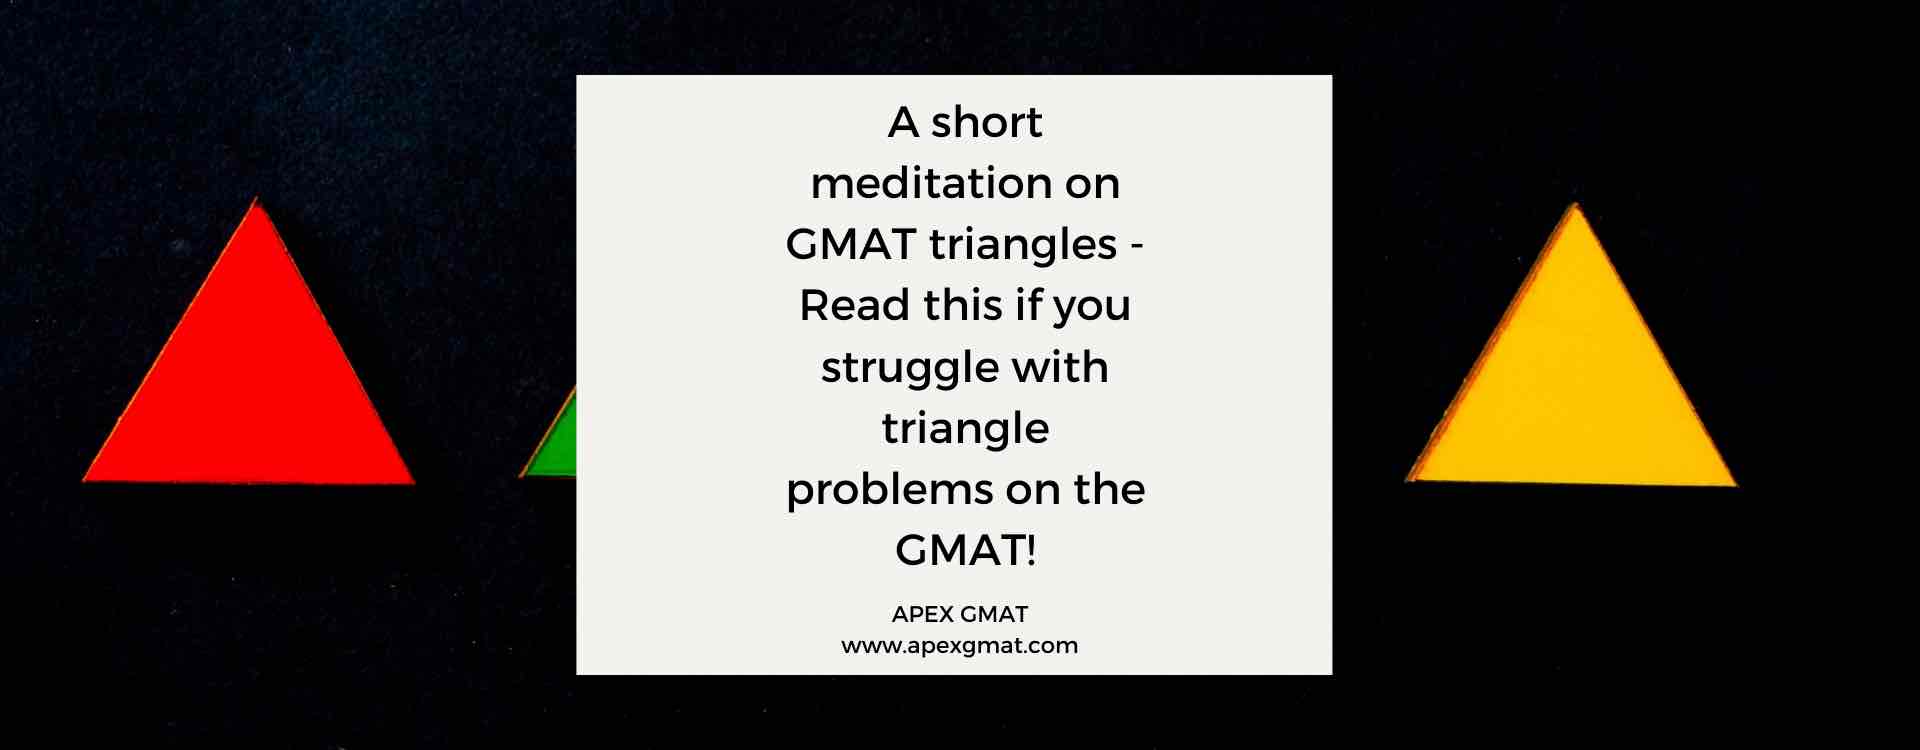 A short meditation on GMAT triangles – Read this if you struggle with triangle problems on the GMAT!